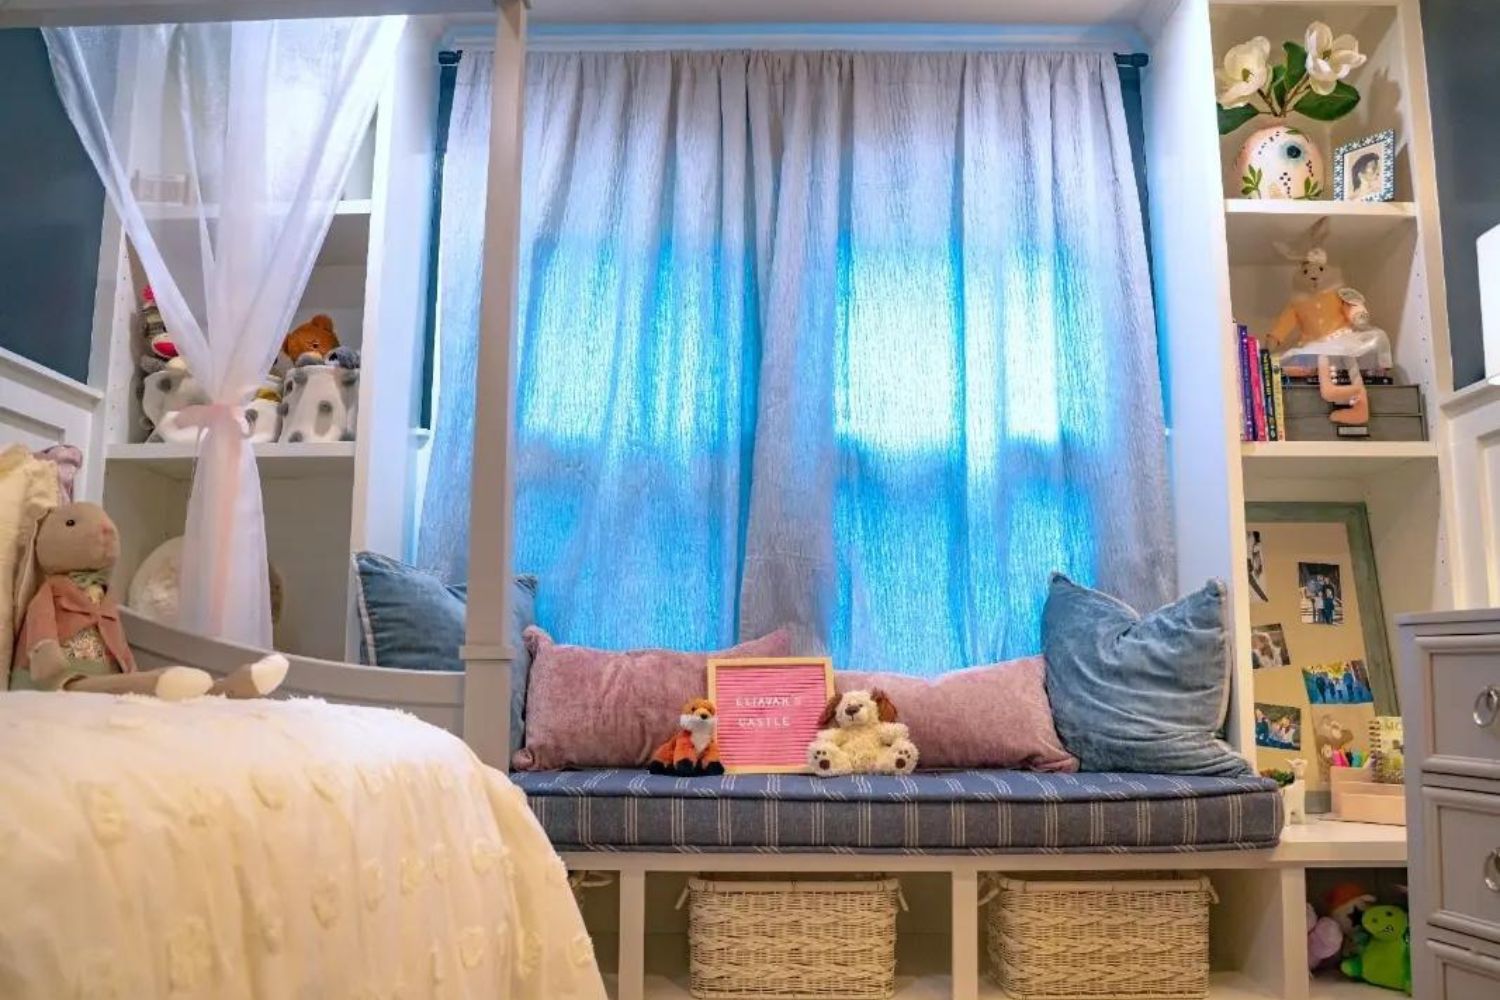 Alair Marietta Helps Create a Dream Bedroom for Roswell Child